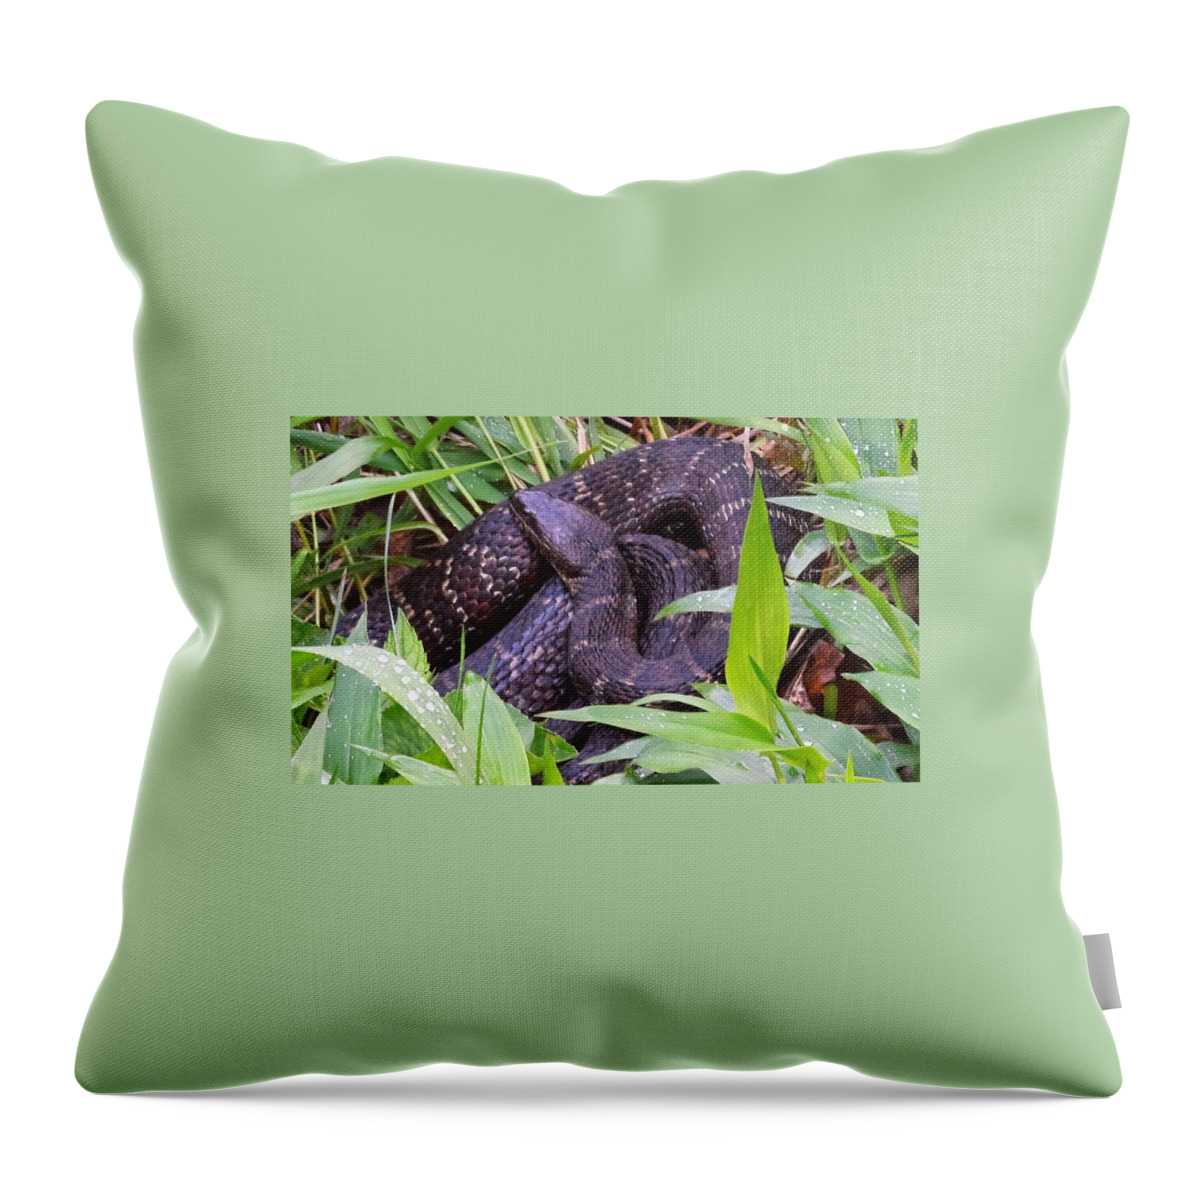 Animals Throw Pillow featuring the photograph Shhhh1 by Charles HALL